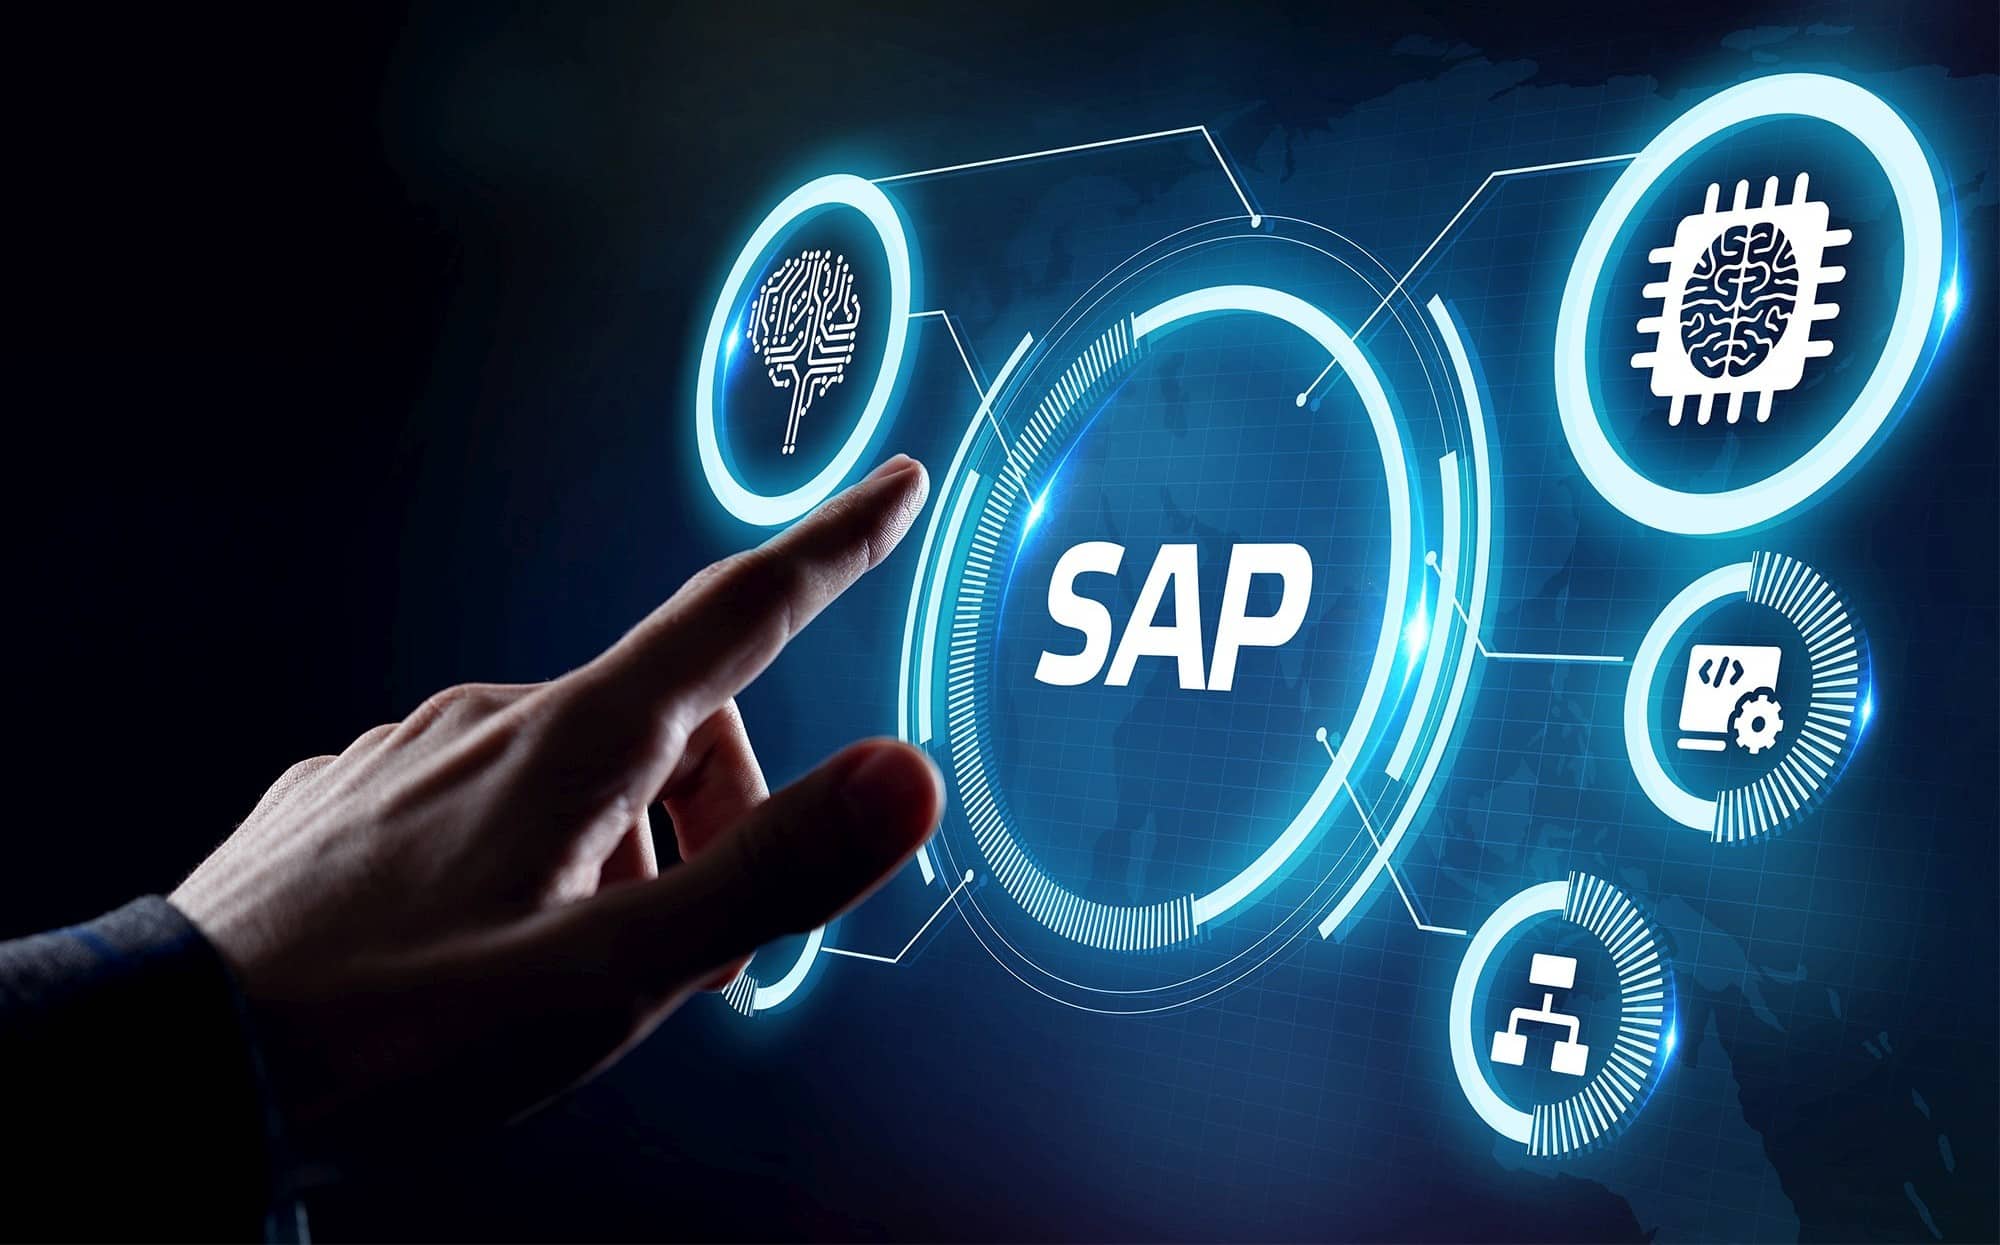 Why and how hackers consistently target SAP systems